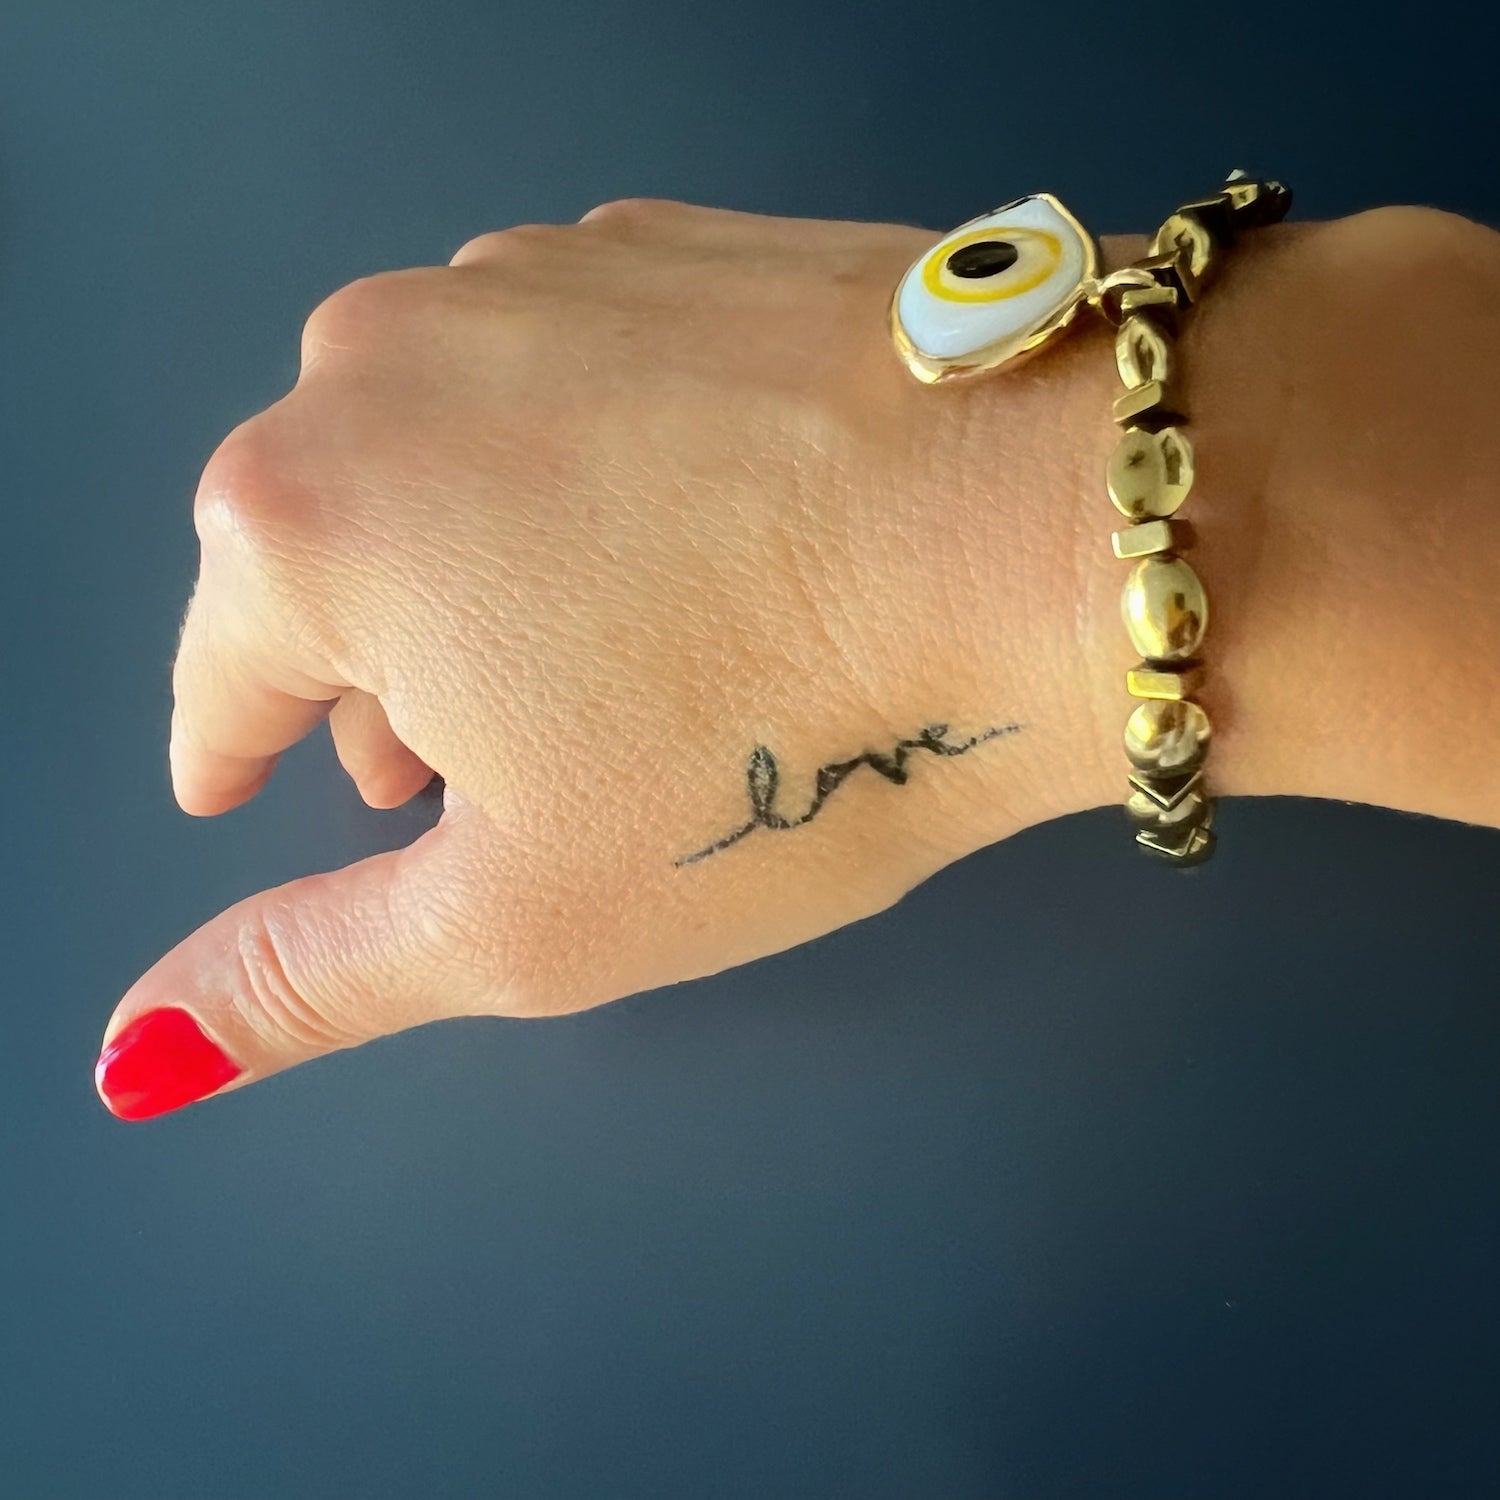 See how the Yellow Evil Eye Bracelet gracefully adorns the hand model&#39;s wrist, capturing attention with its stunning design and symbolism.